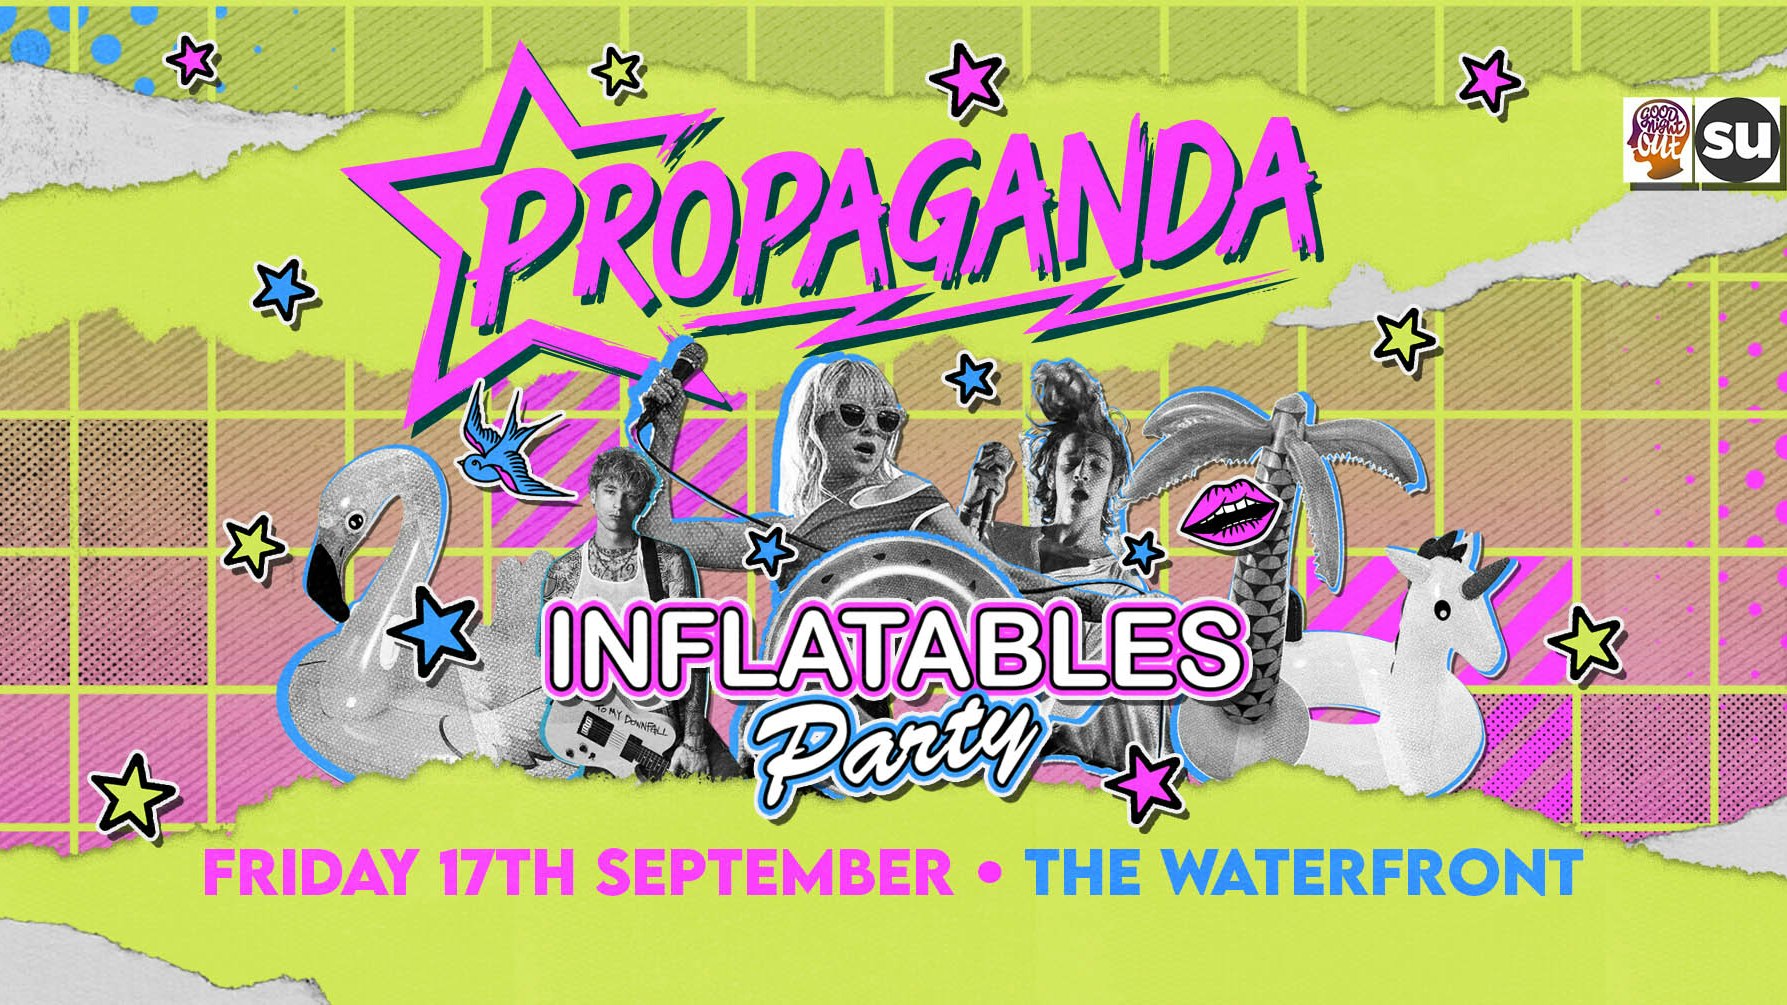 Propaganda Norwich – Inflatables Party!